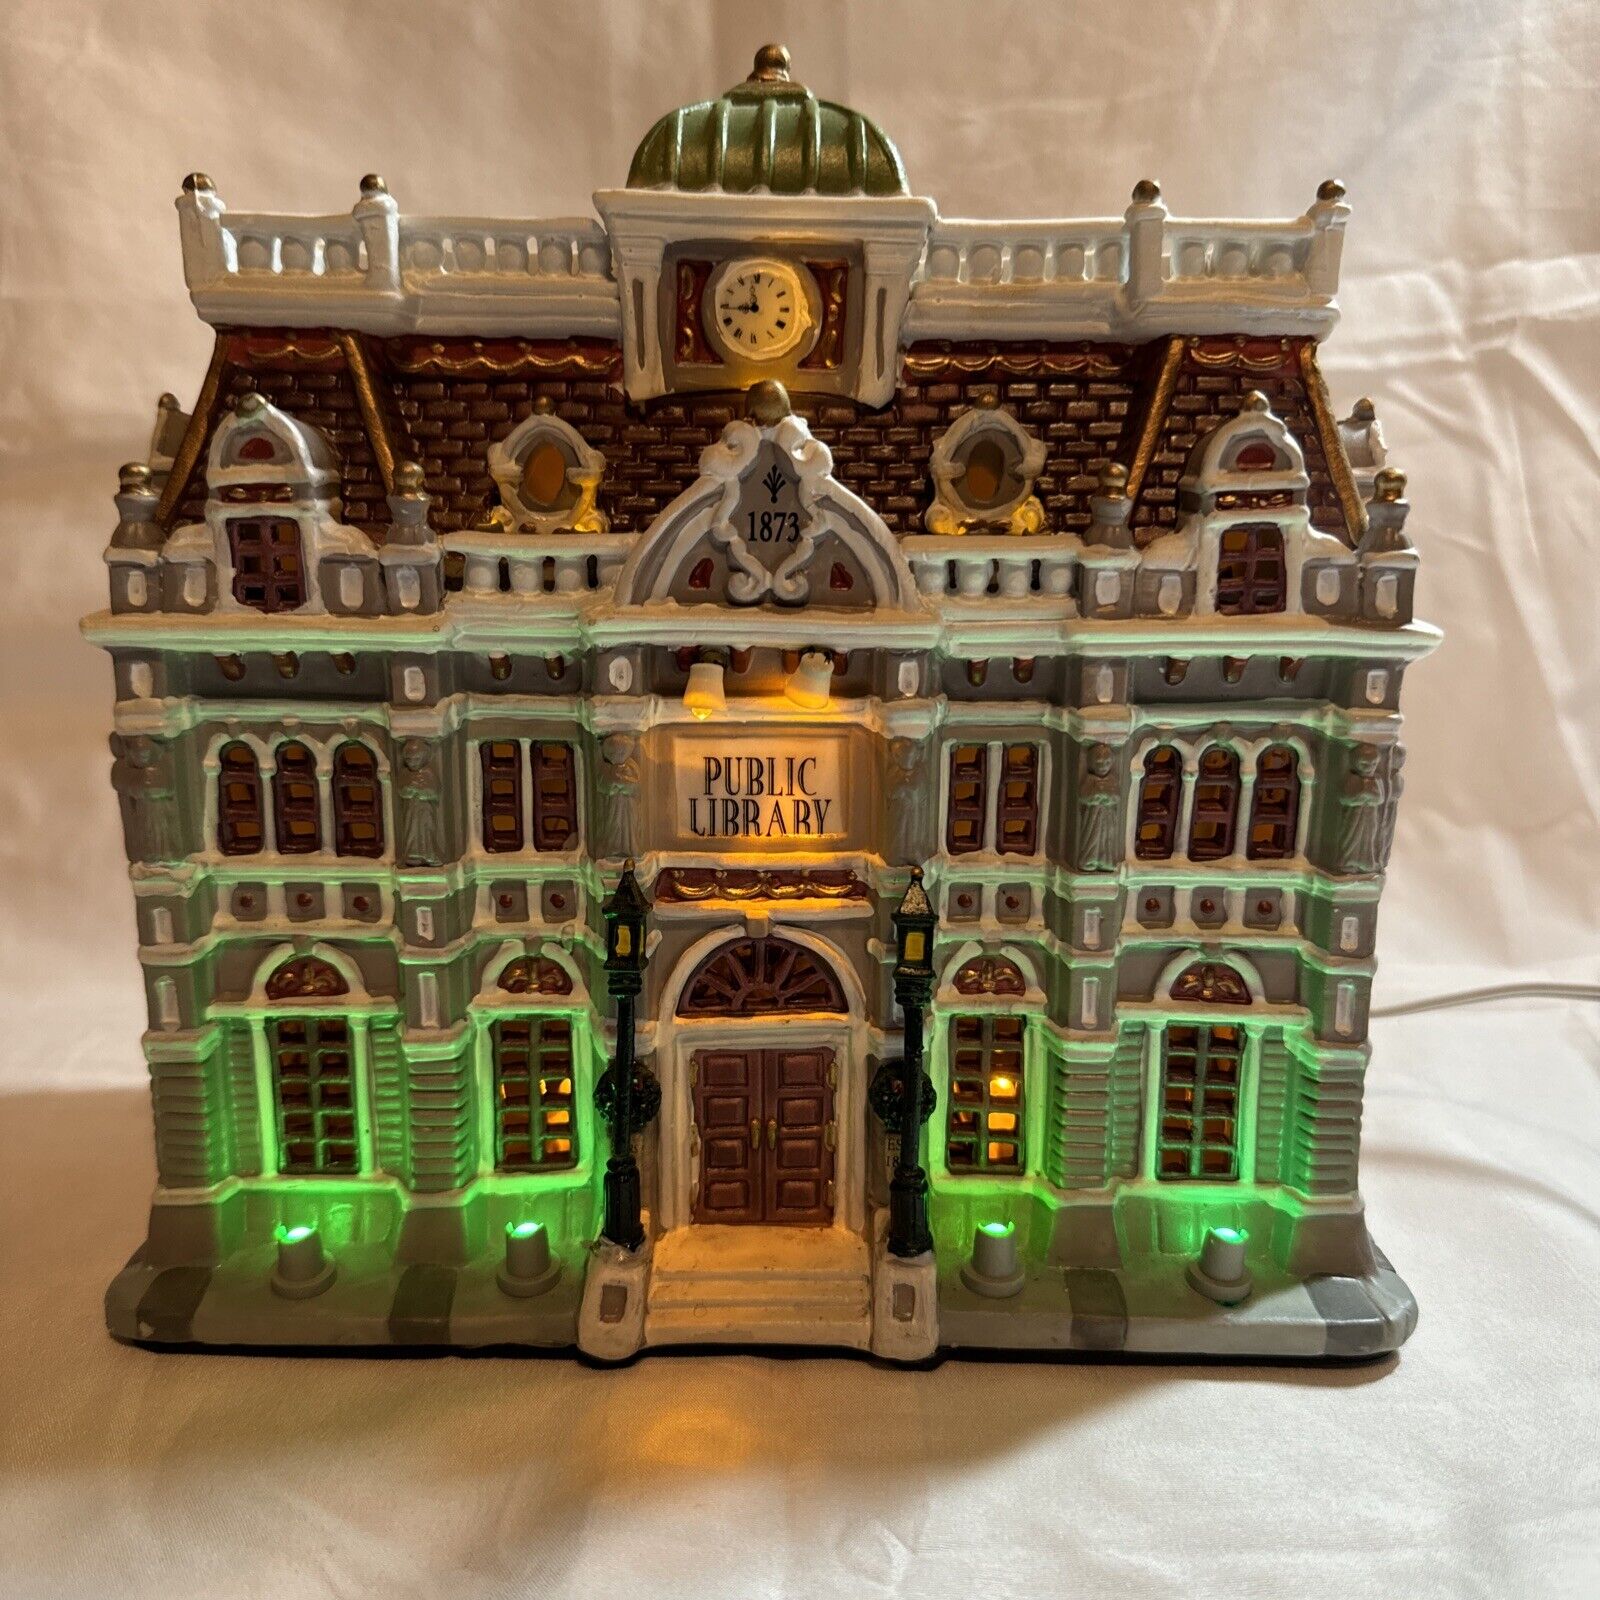 2005 LEMAX Lighted Christmas Village - PUBLIC LIBRARY Tested And Working